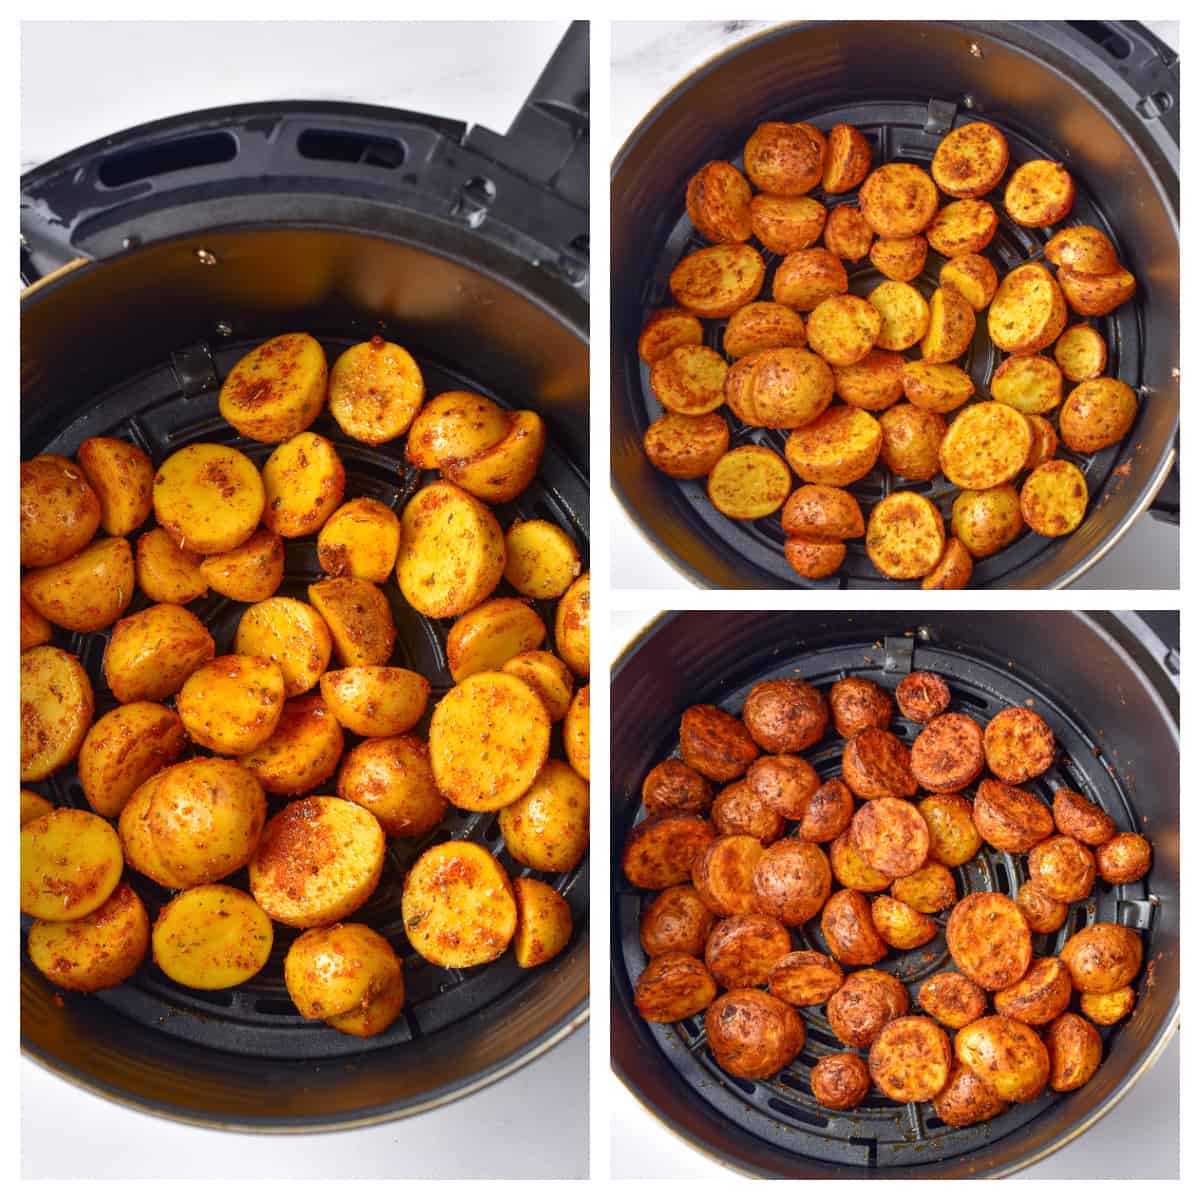 Stages of air frying potatoes.